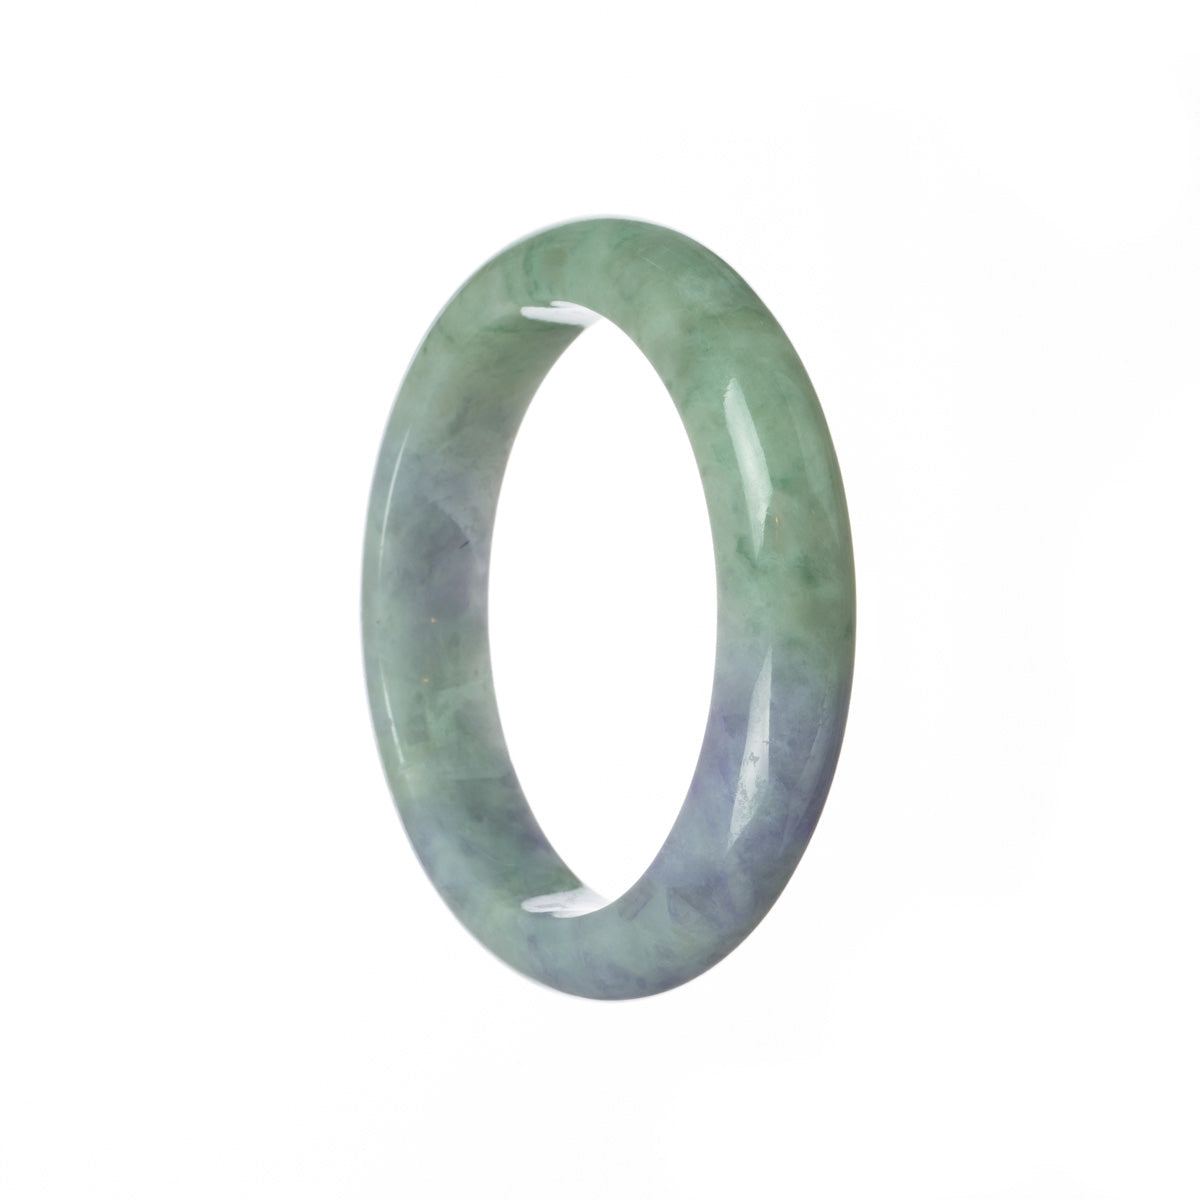 A lavender and green jade bracelet in a half moon shape, certified as Grade A by Mays Gems.